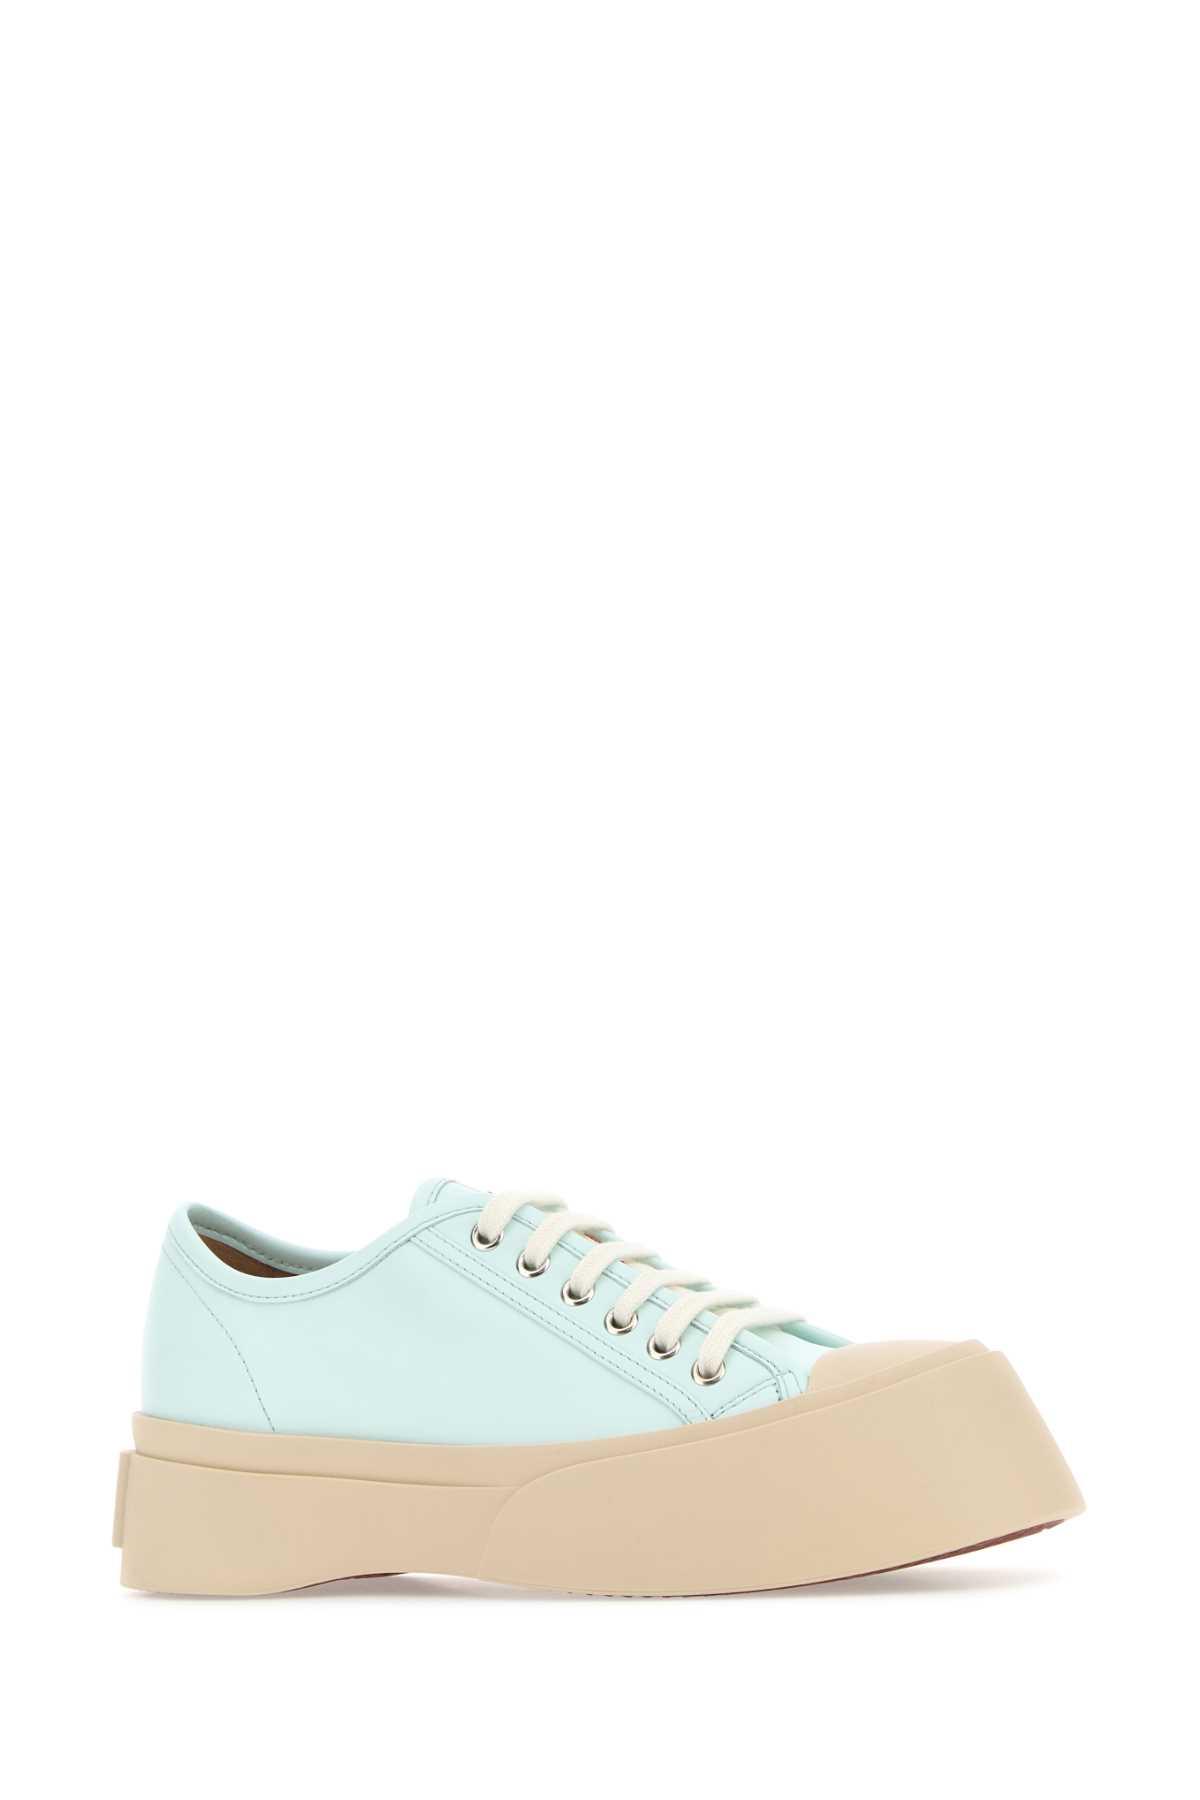 MARNI LIGHT BLUE LEATHER PABLO SNEAKERS